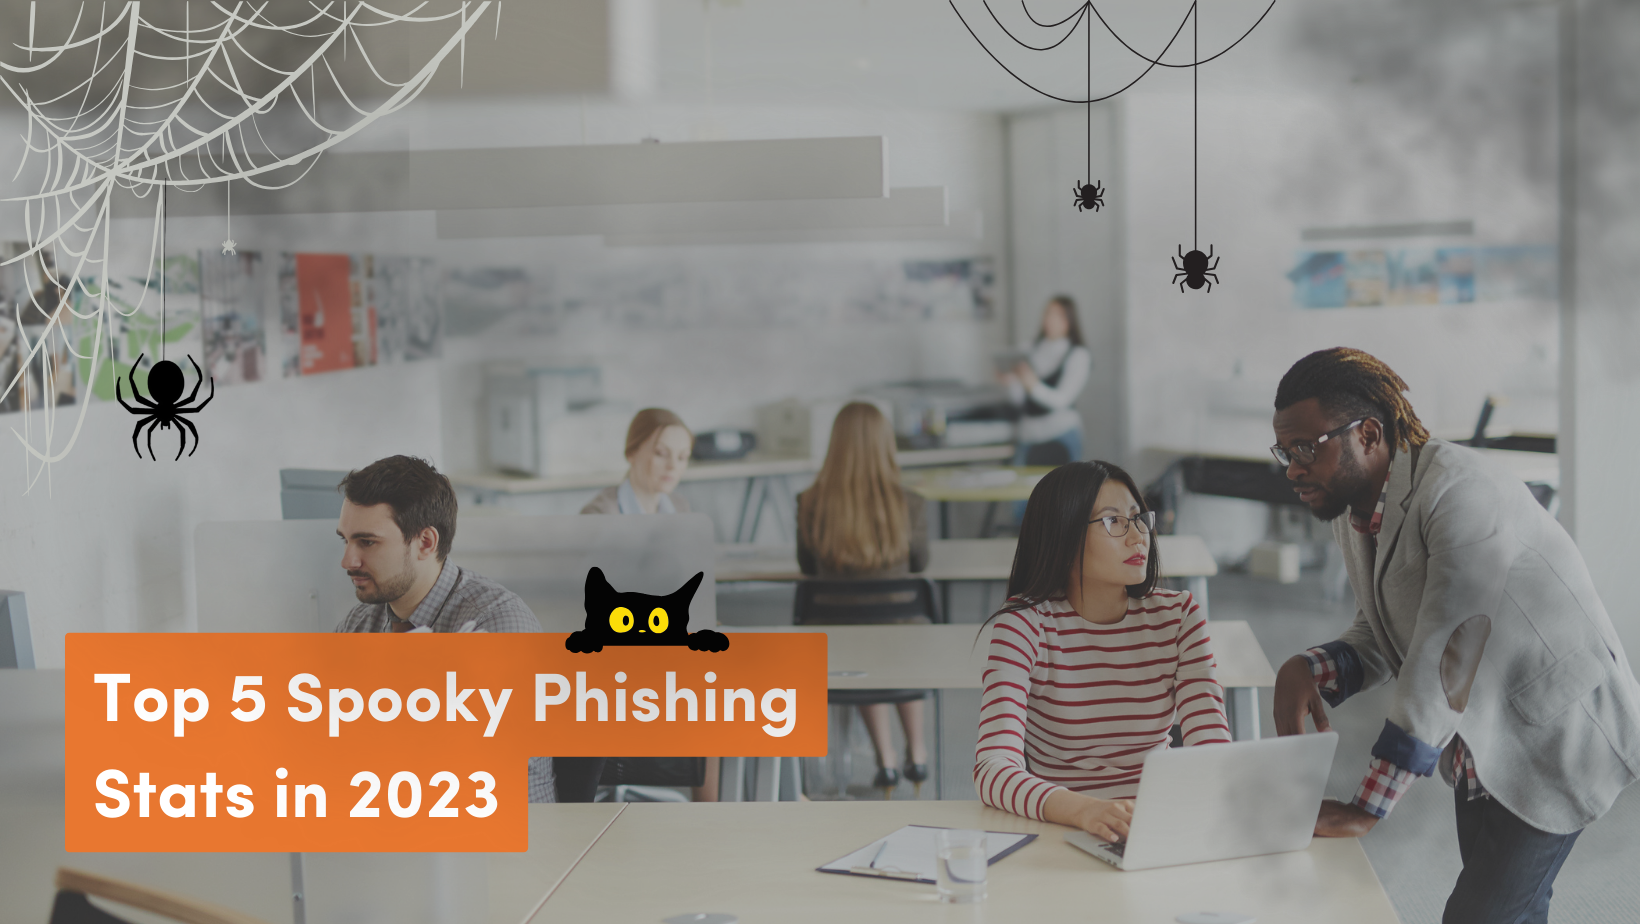 Featured image: People in office working amidst phishing threats - Spooky Phishing Trends Haunting the Cyberworld This Halloween